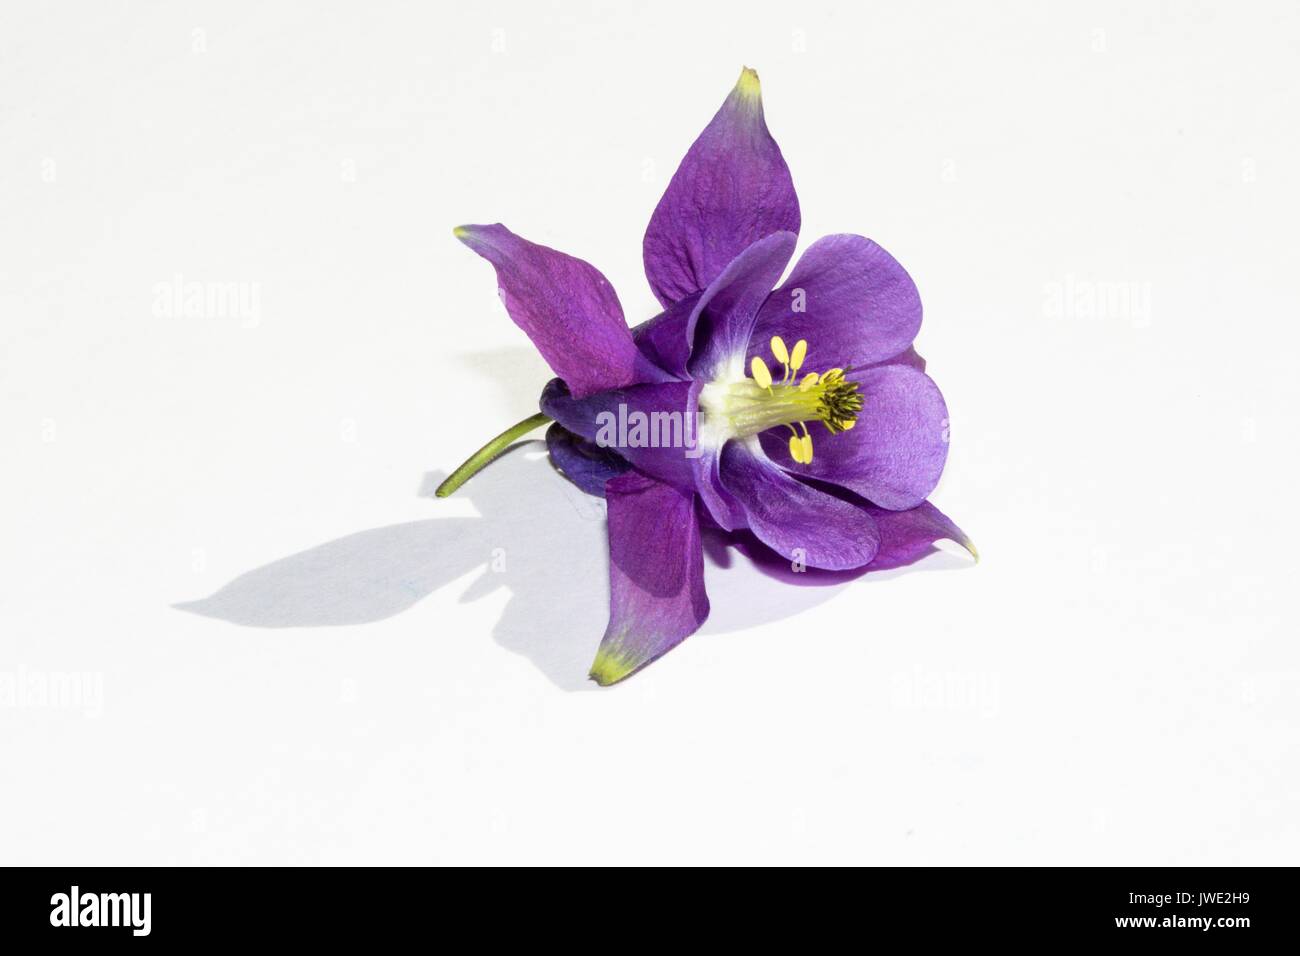 Violet flower of a field plant on a white background. Stock Photo